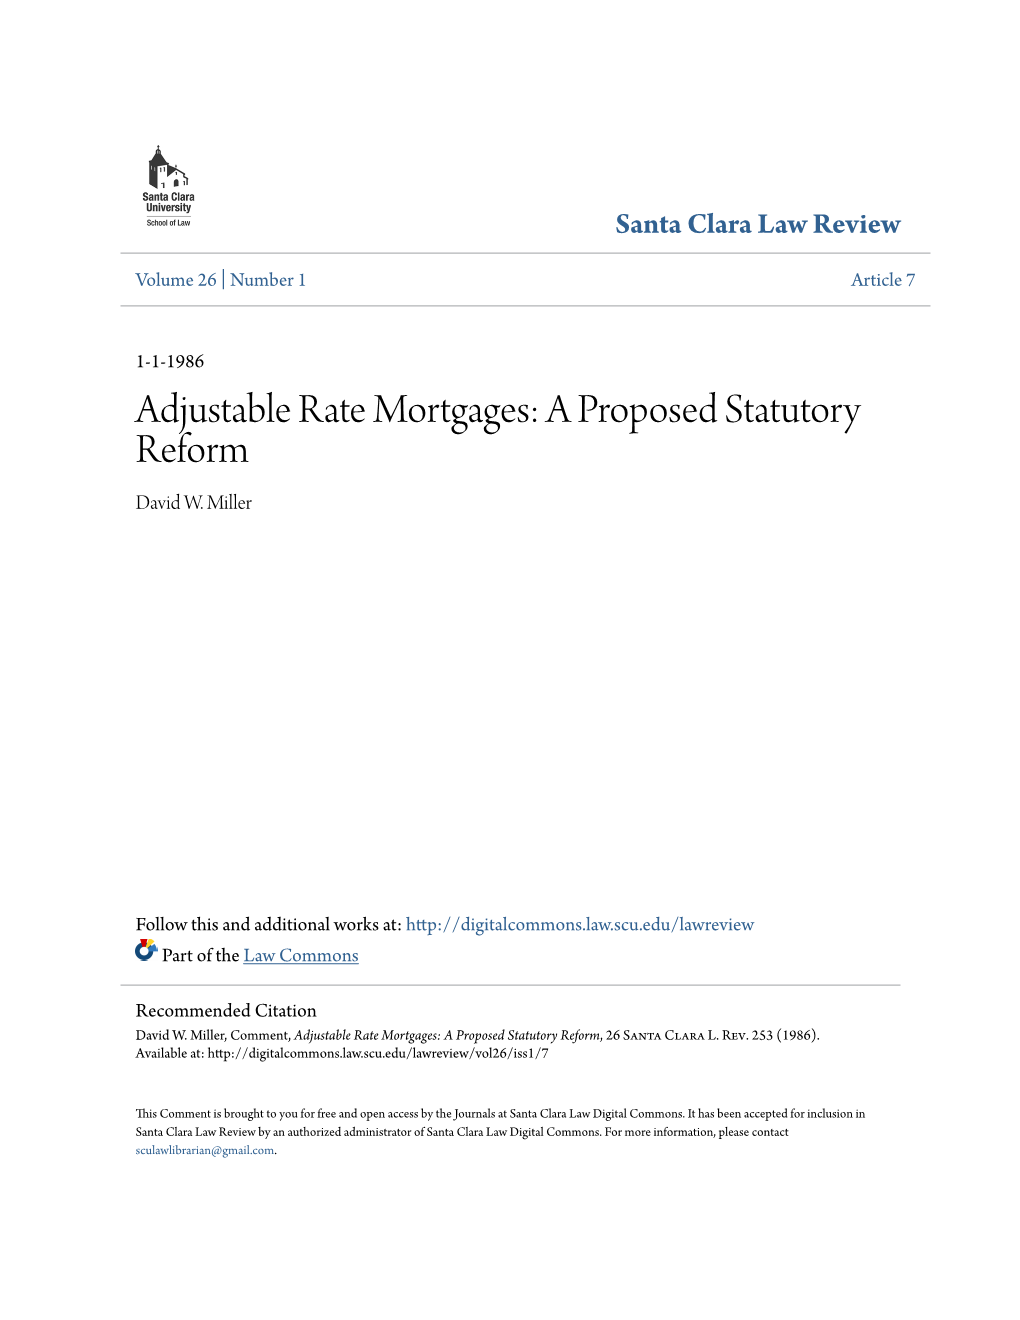 Adjustable Rate Mortgages: a Proposed Statutory Reform David W